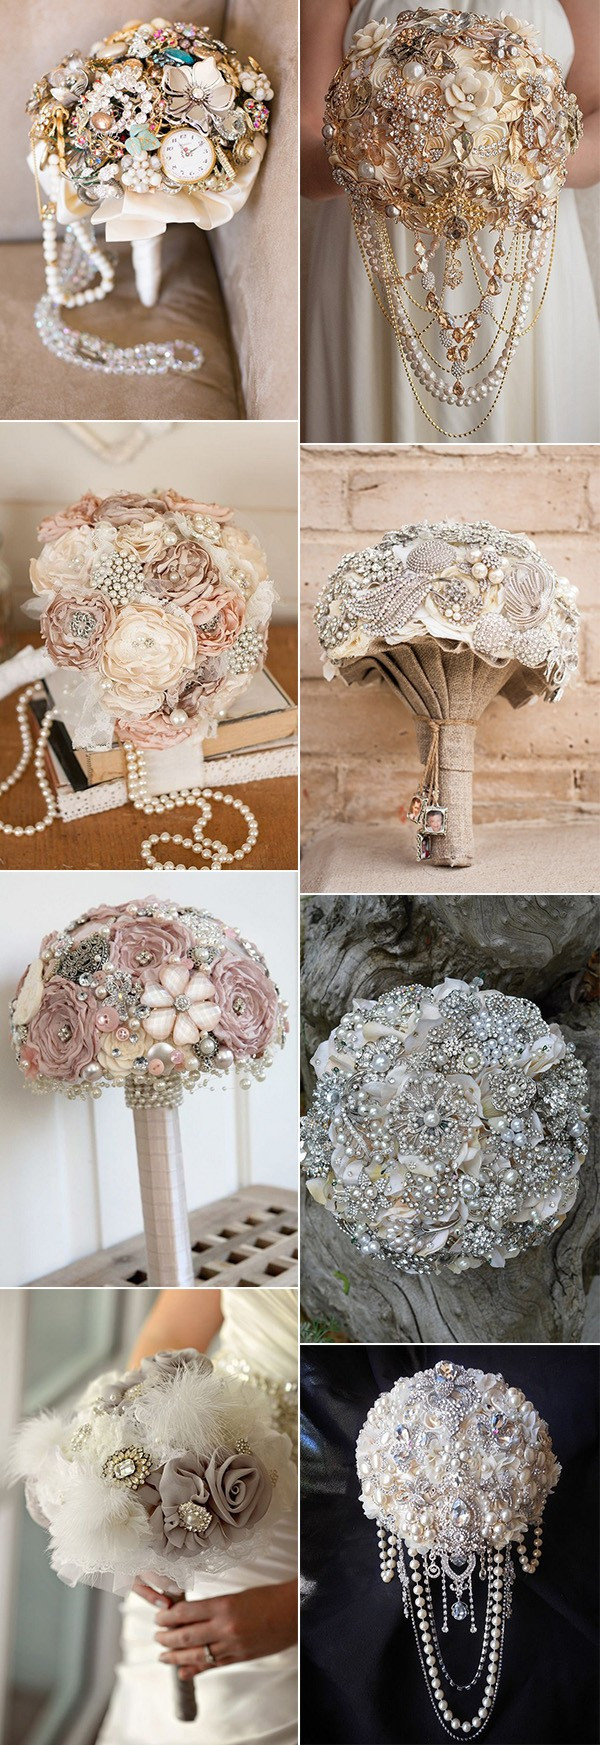 Brooches Ideas
 Top 10 Vintage Wedding Brooch Bouquet Ideas for 2018